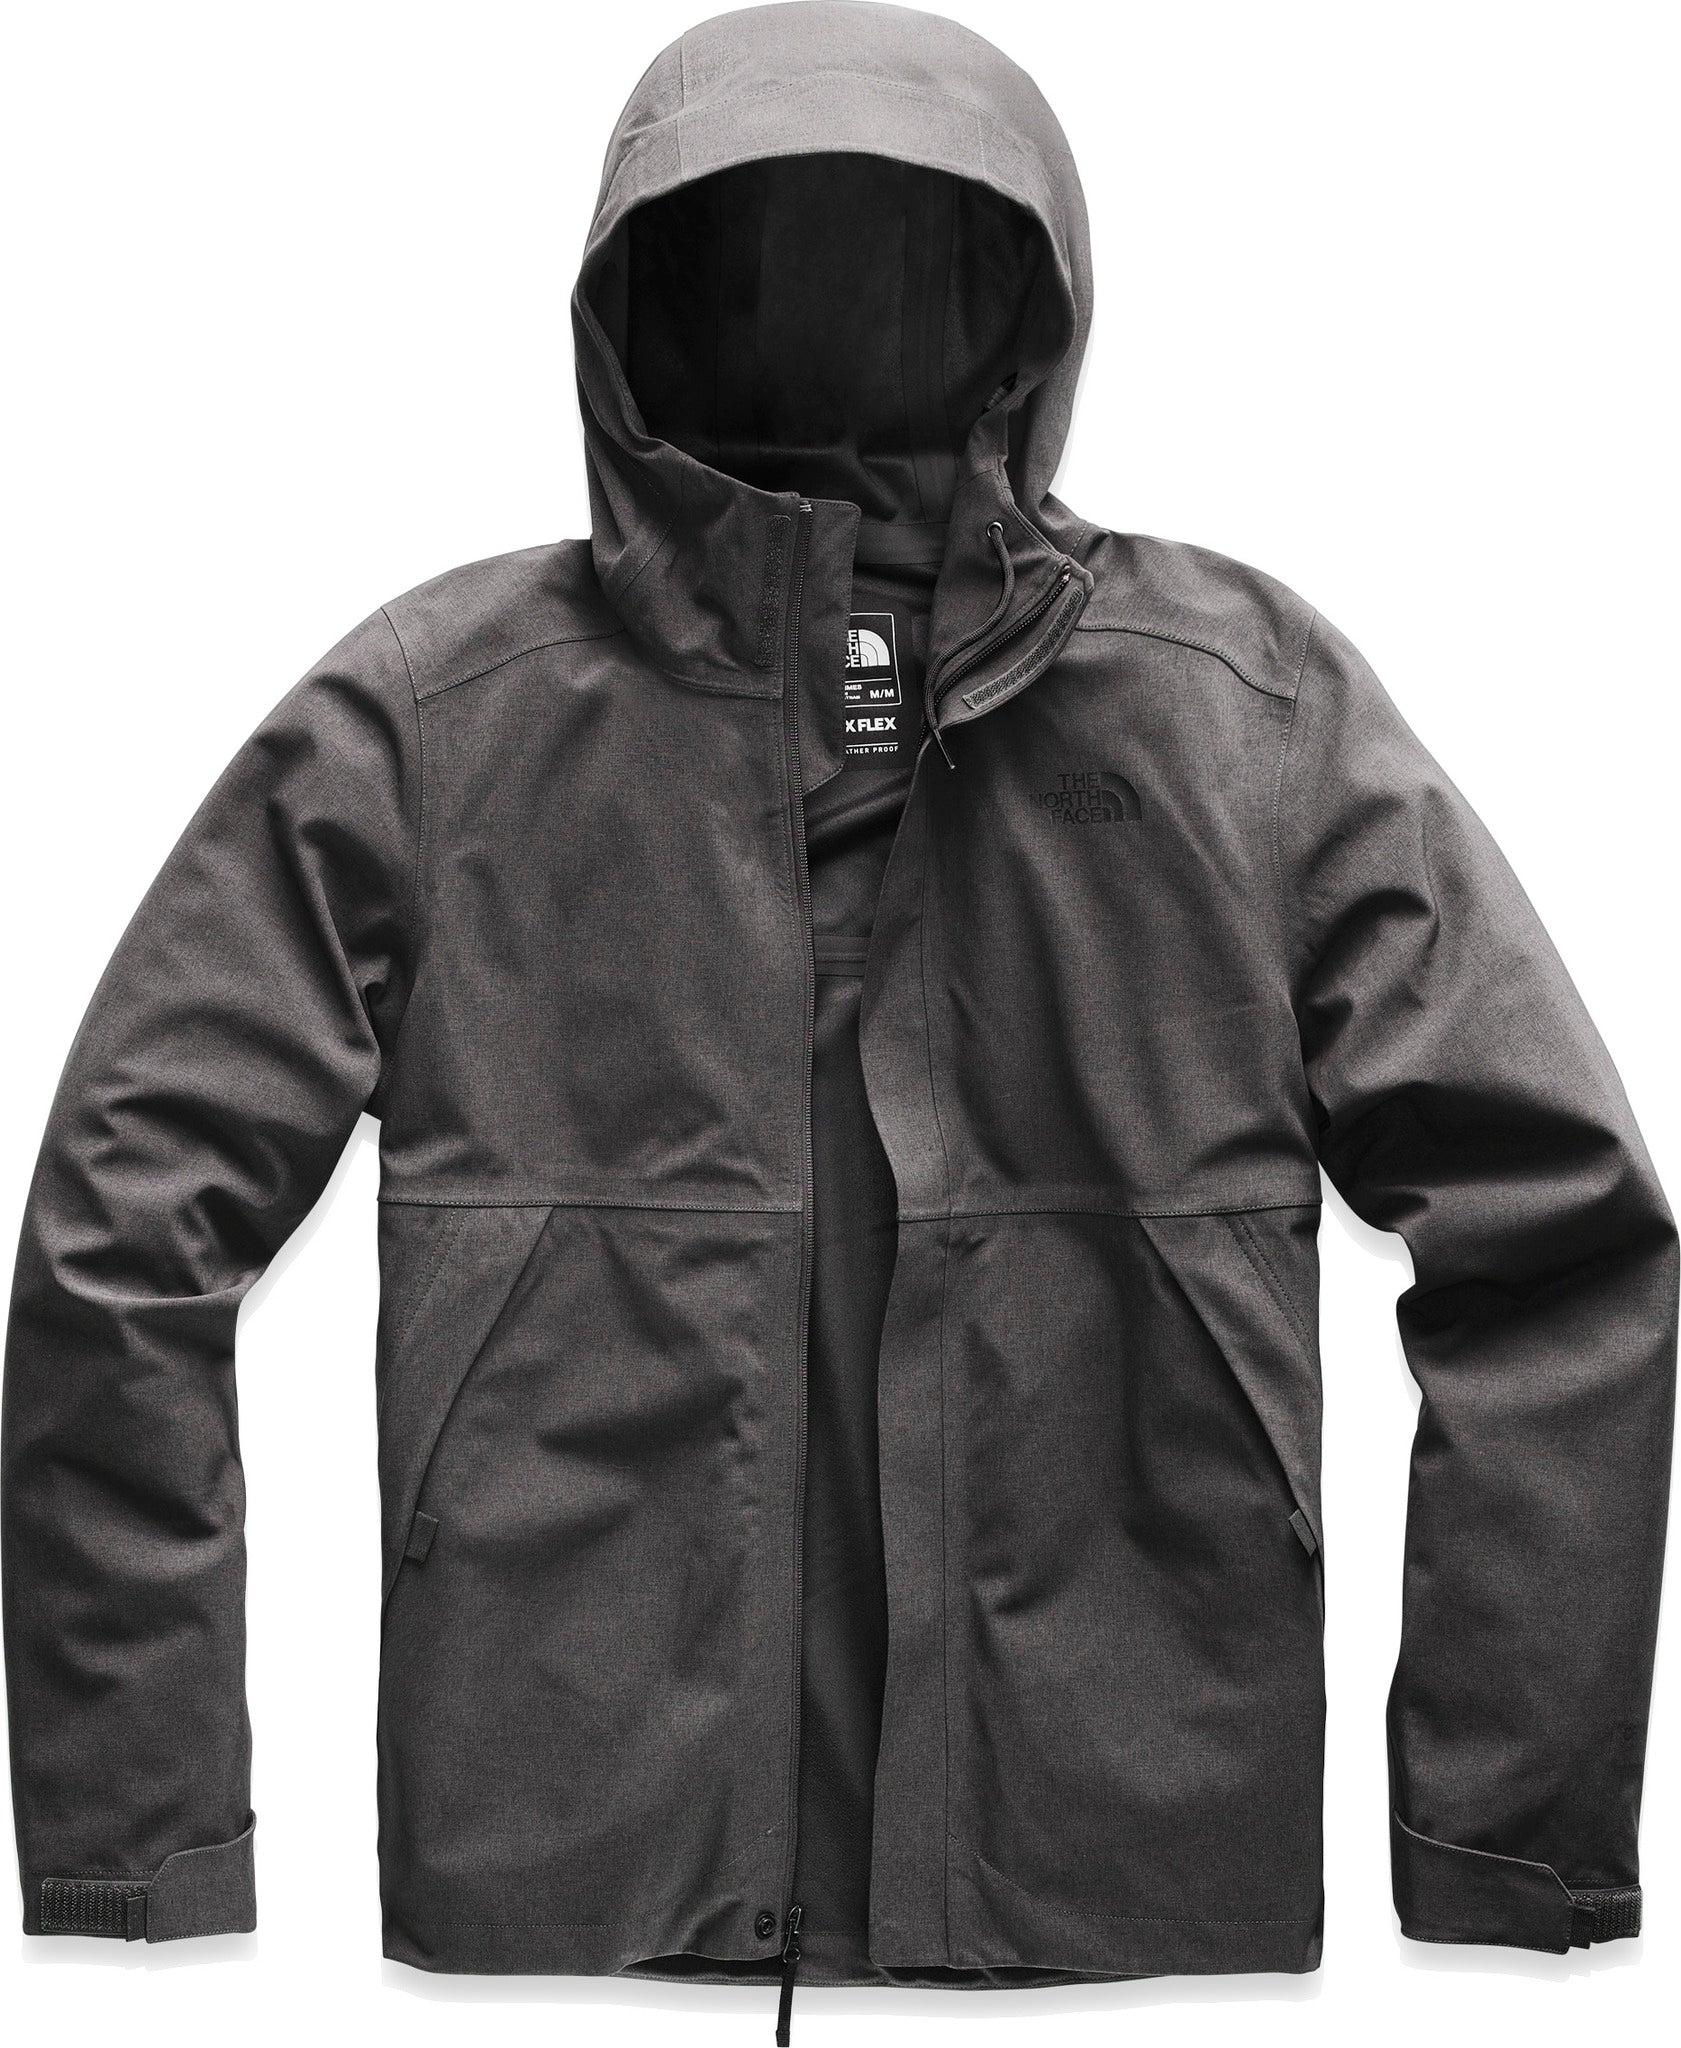 dryvent jacket north face